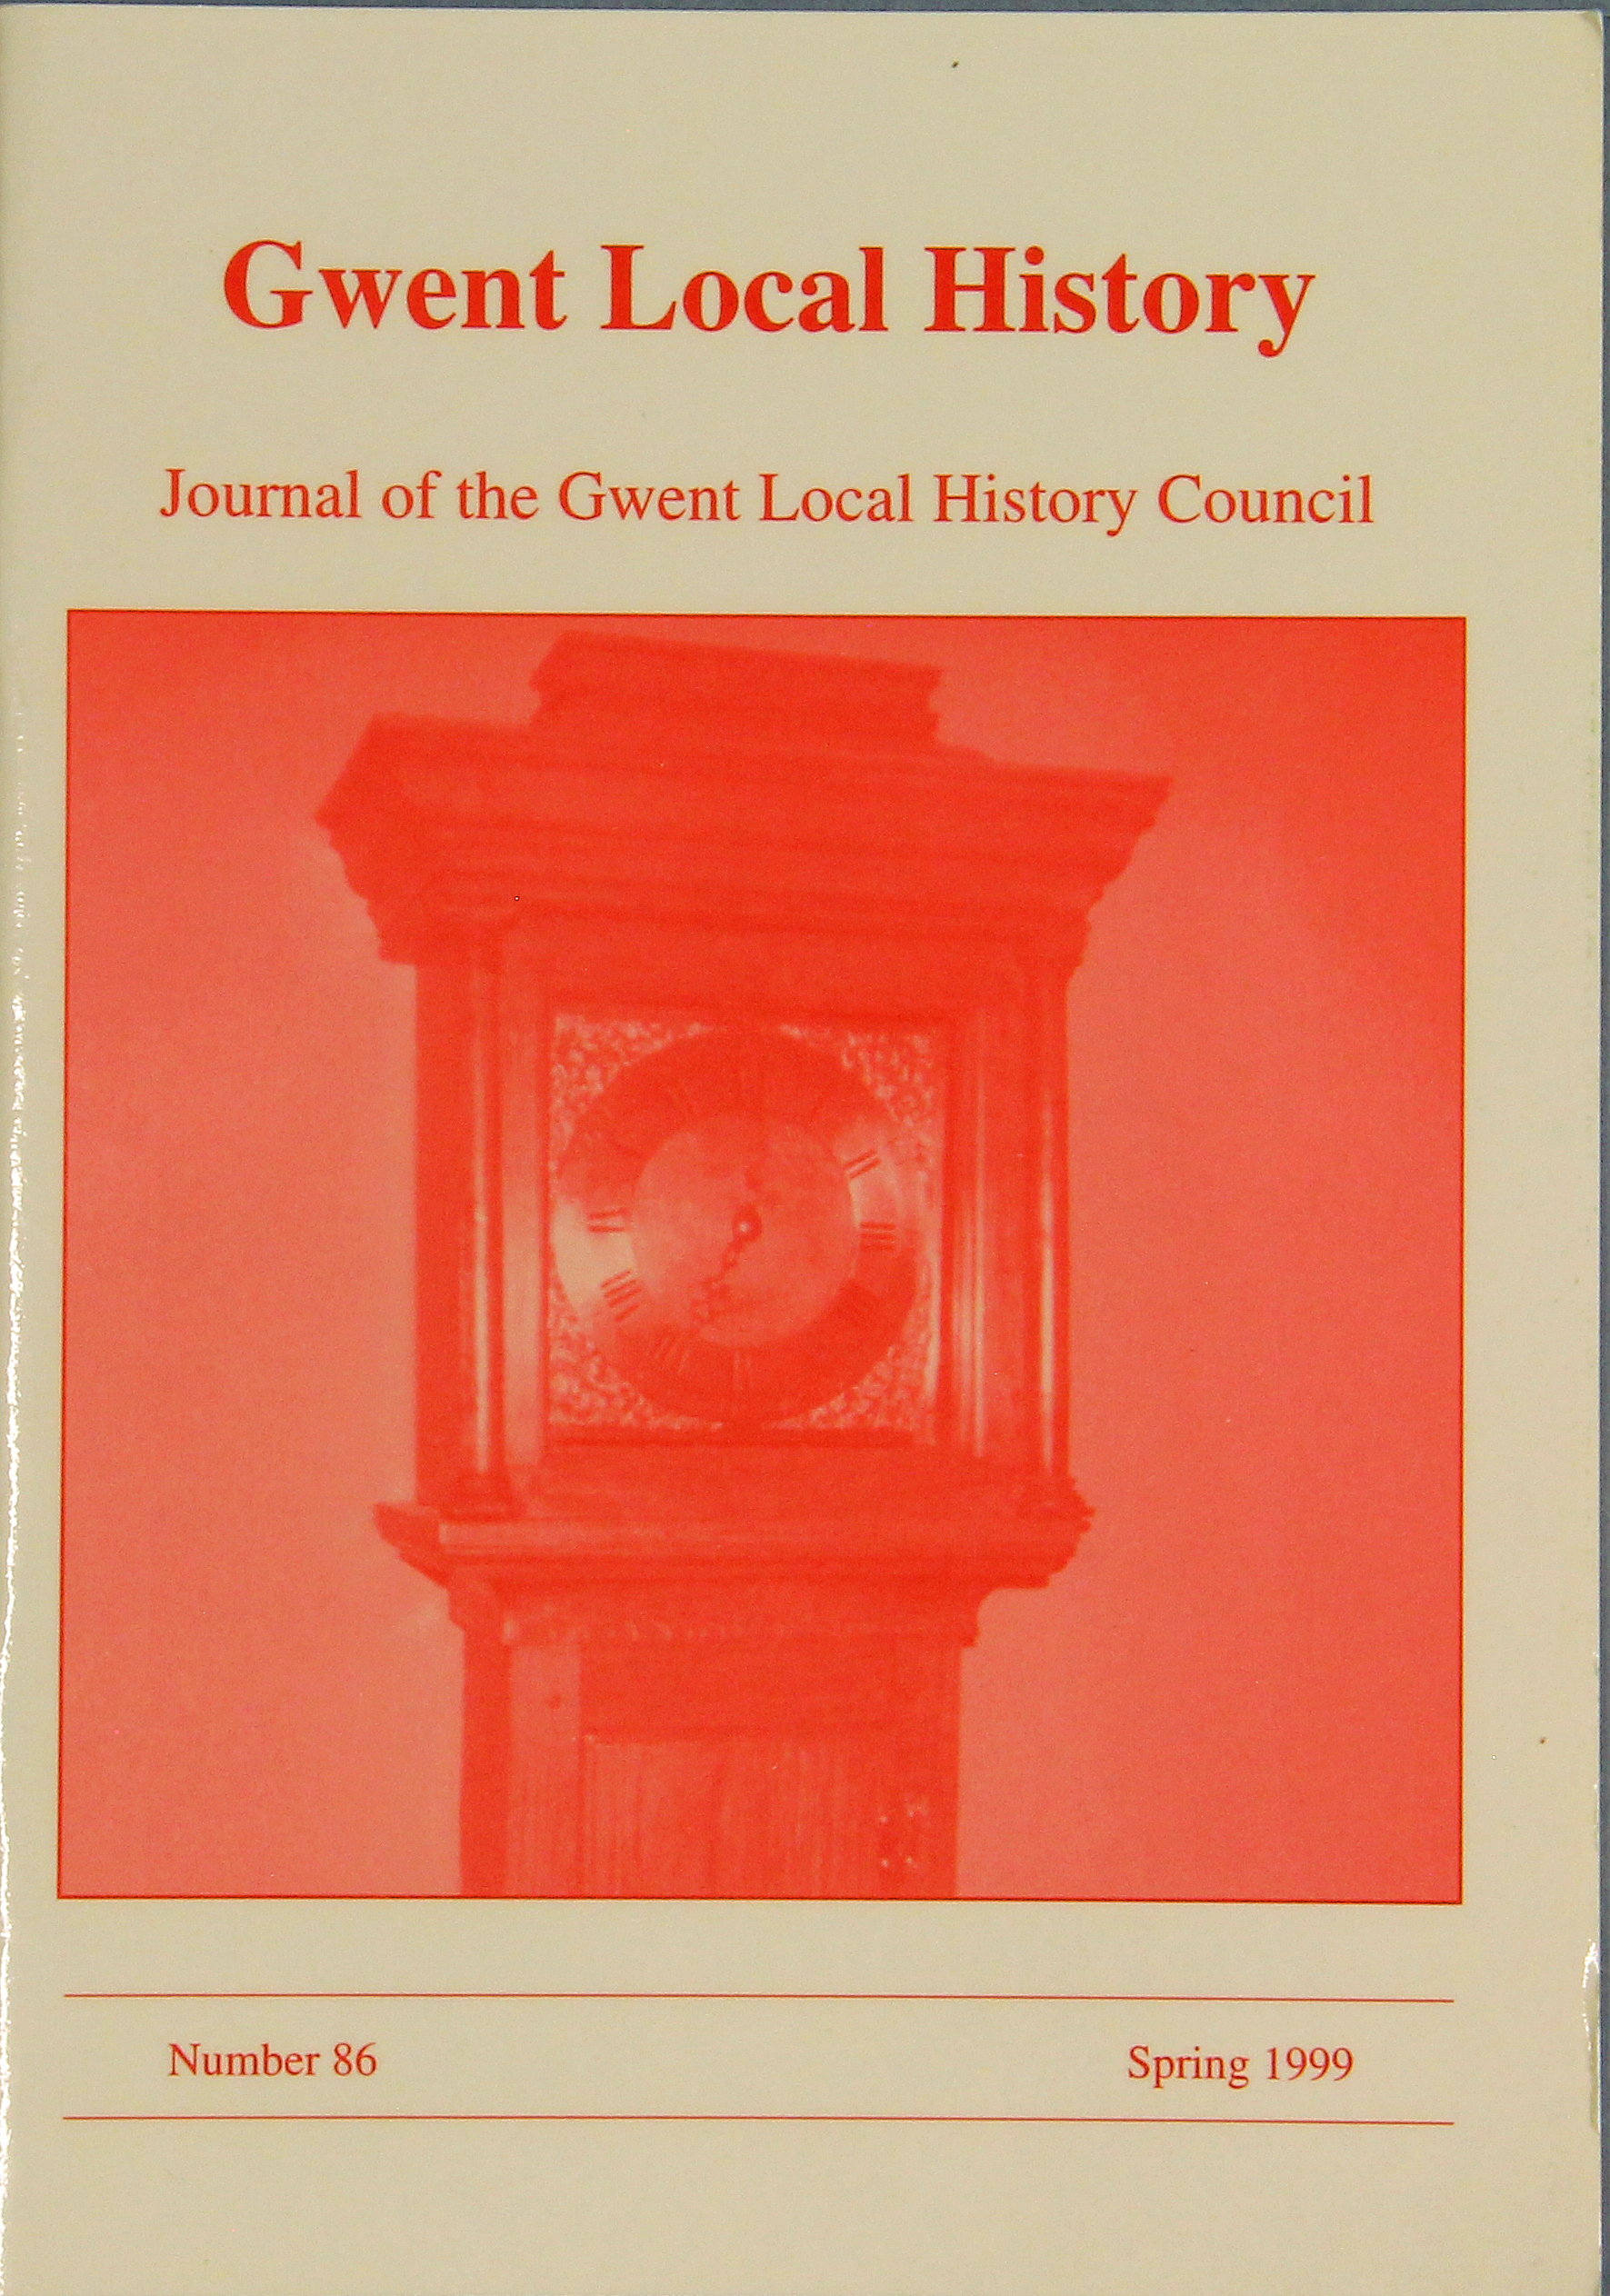 Gwent Local History: Journal of the Gwent Local History Council No.86, Spring 1999, £2.00